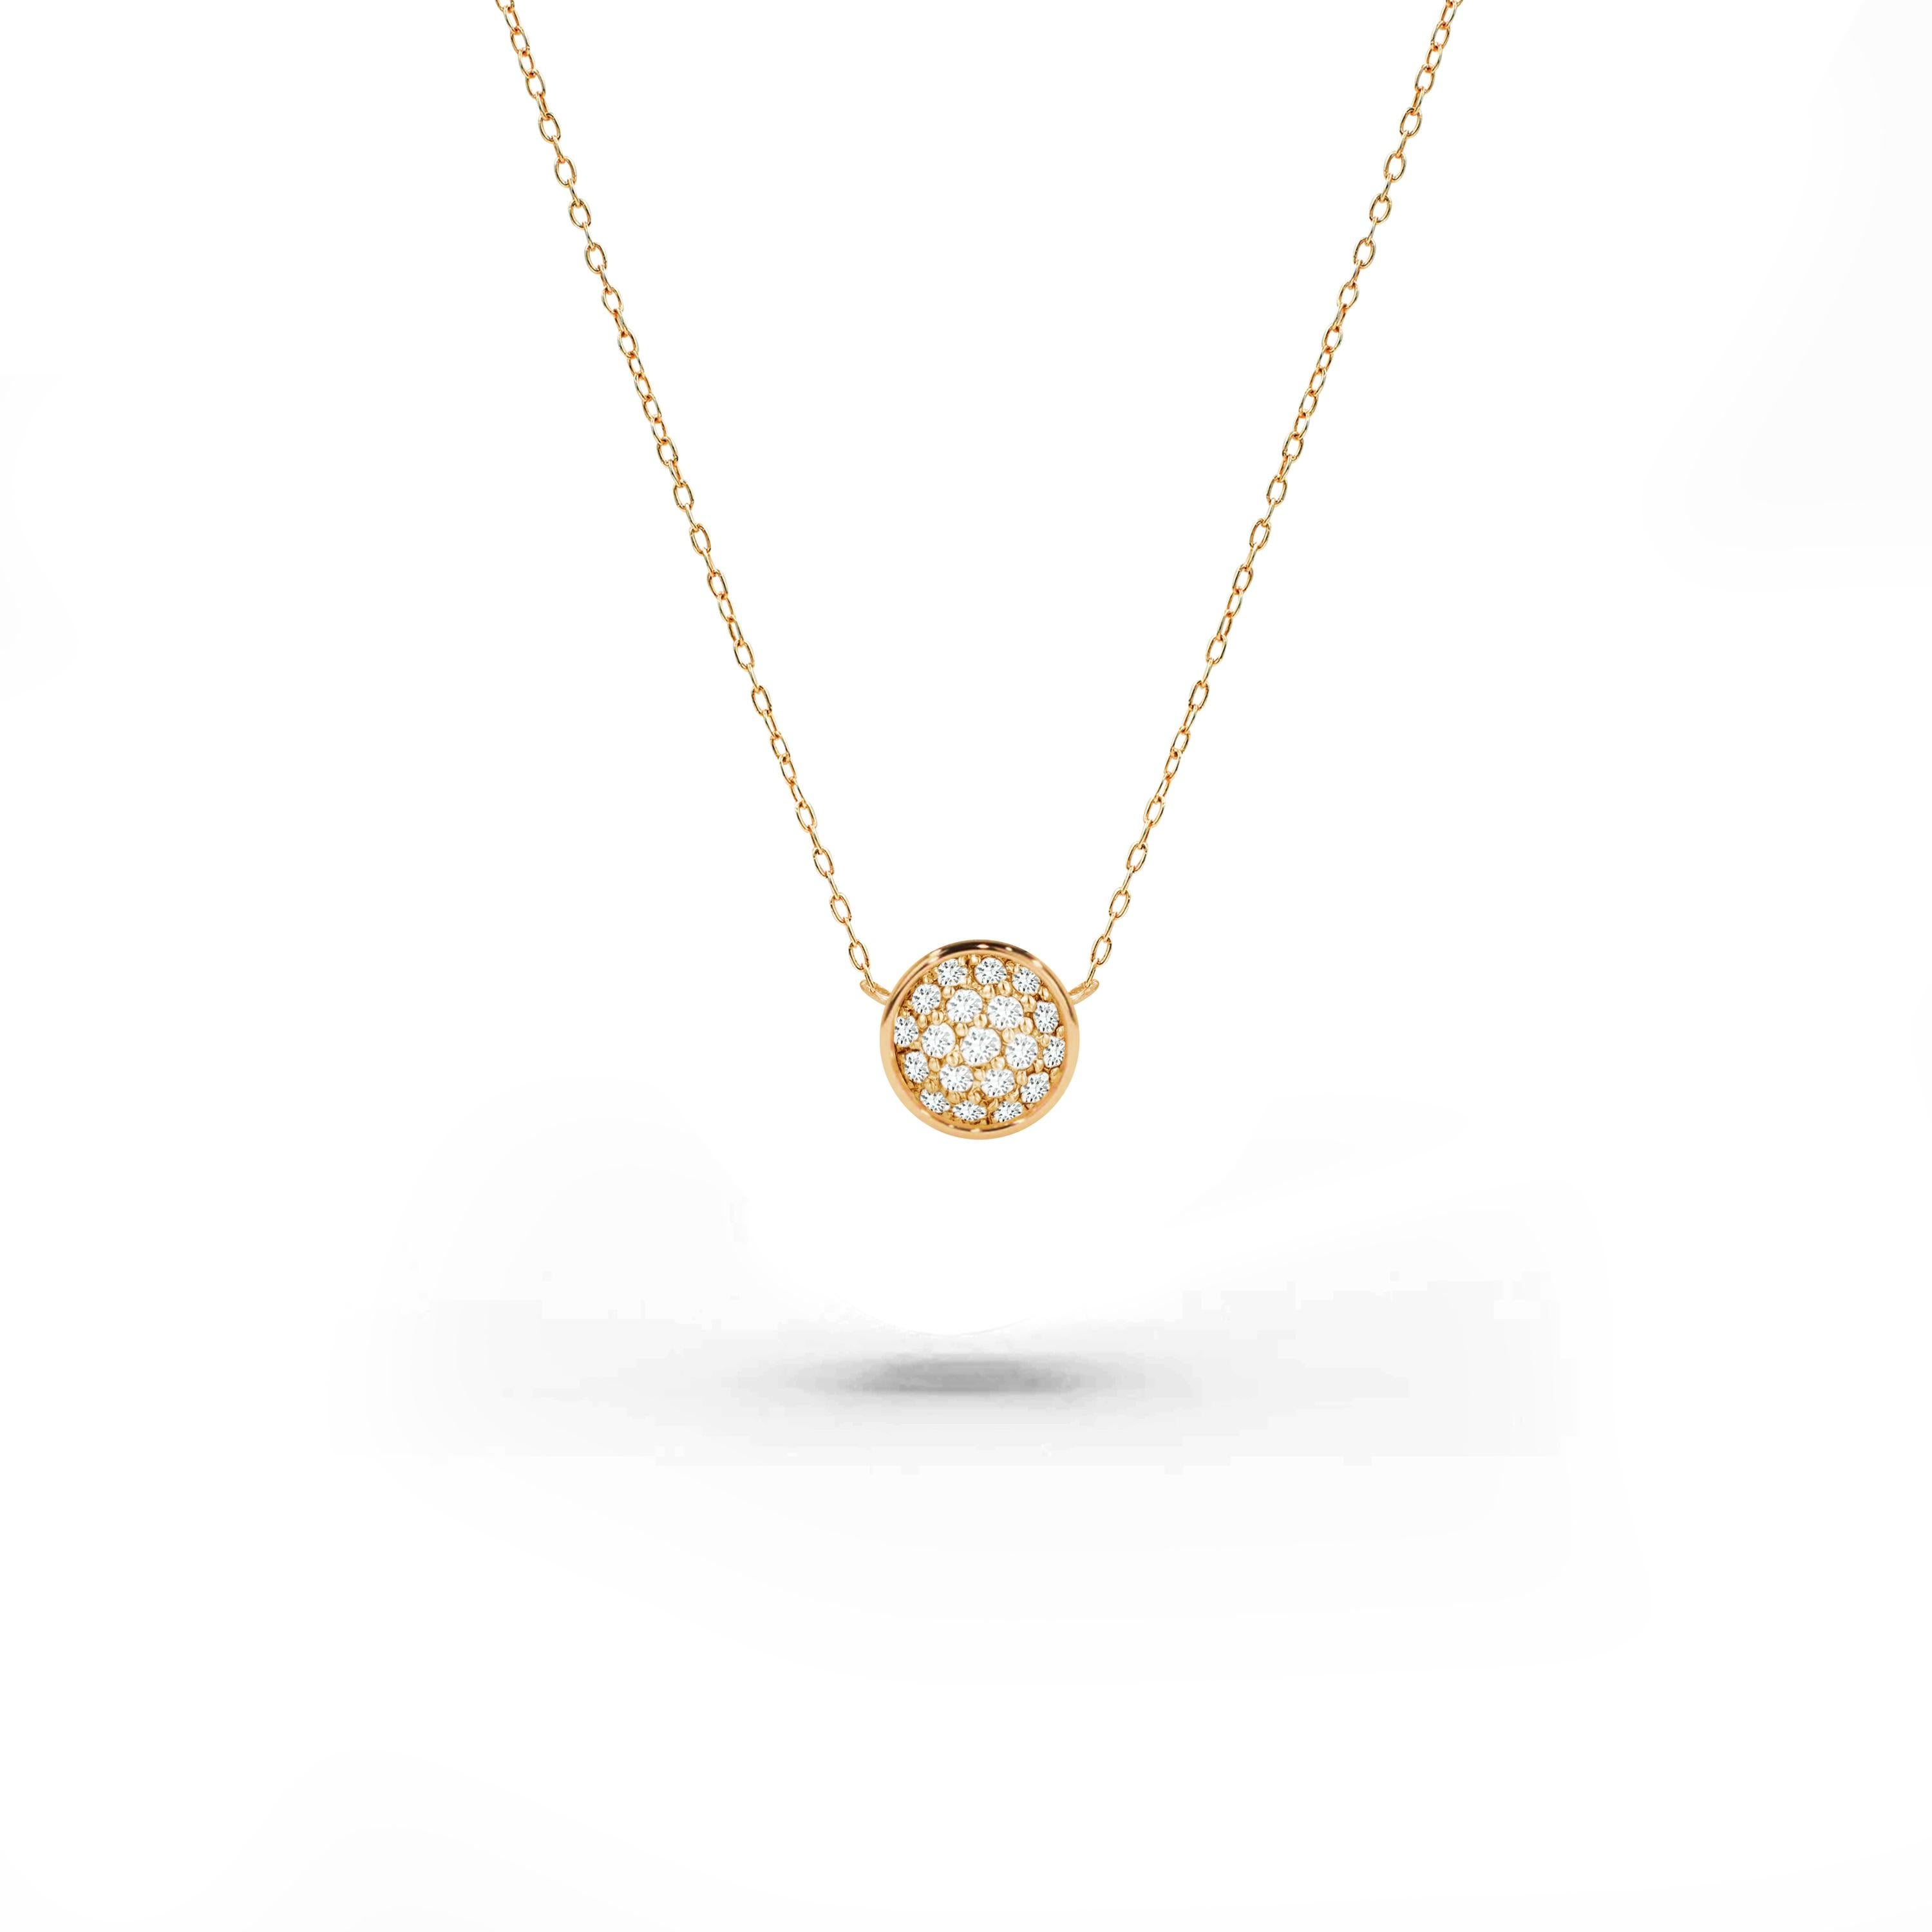 Diamond Circle Necklace 14k Solid Rose Gold Diamond Cluster Disc Necklace Pave Set Natural Diamond Simple Minimal Necklace

This listing is for 14k Gold and the item is ready to ship if you want it in any other option like rose gold, yellow gold